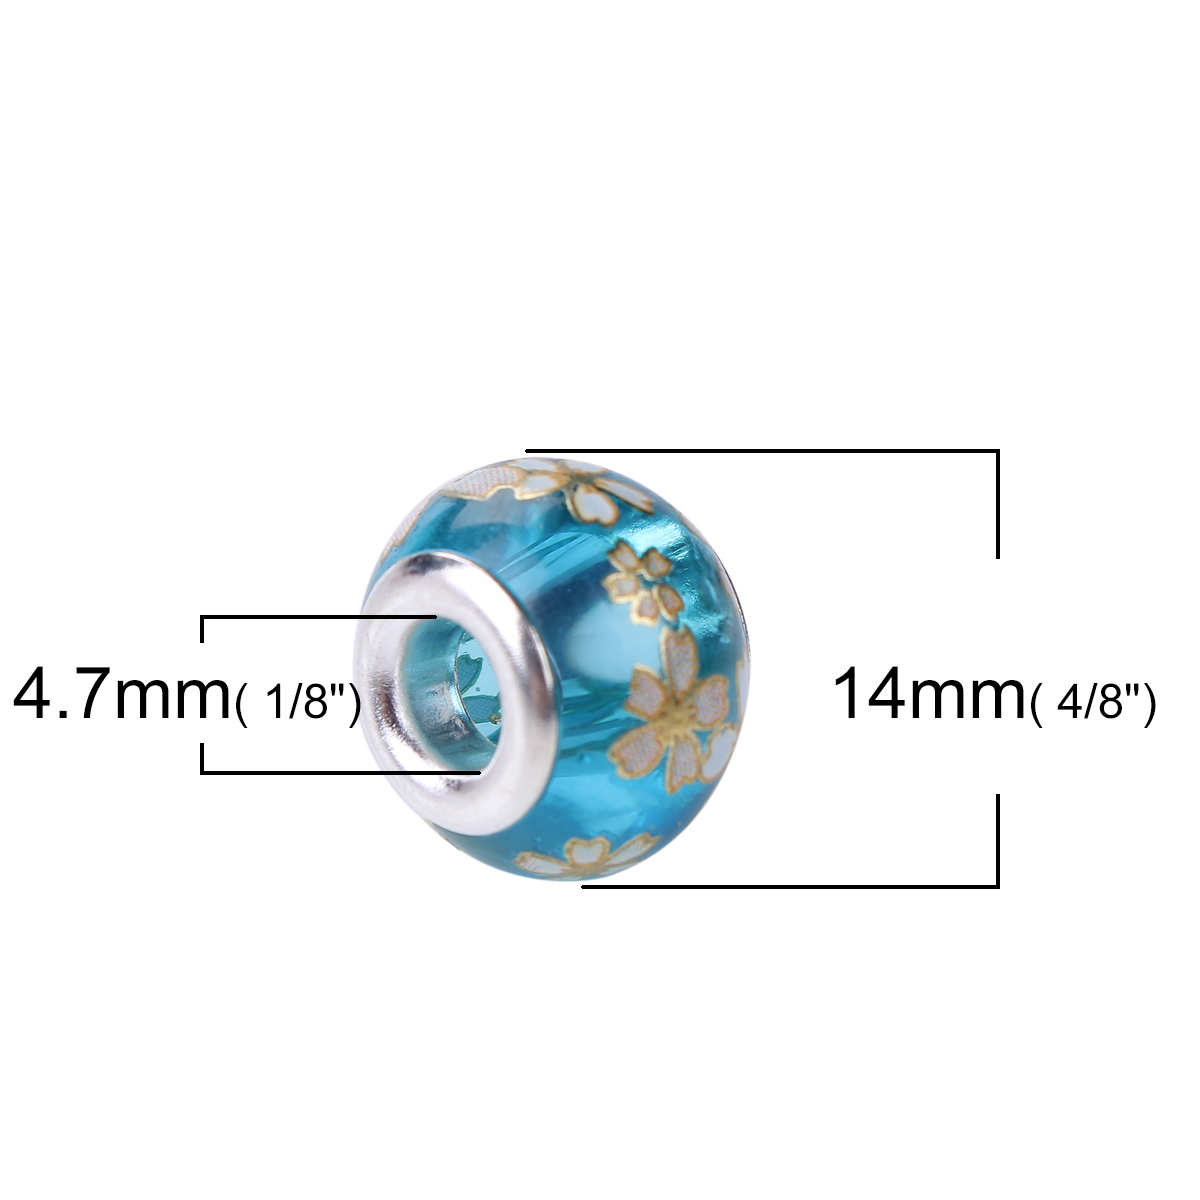 Picture of Glass Japan Painting Vintage Japanese Tensha European Style Large Hole Charm Beads Round Silver Plated Sakura Flower Lake Blue Transparent About 14mm( 4/8") Dia, Hole: Approx 4.7mm, 5 PCs